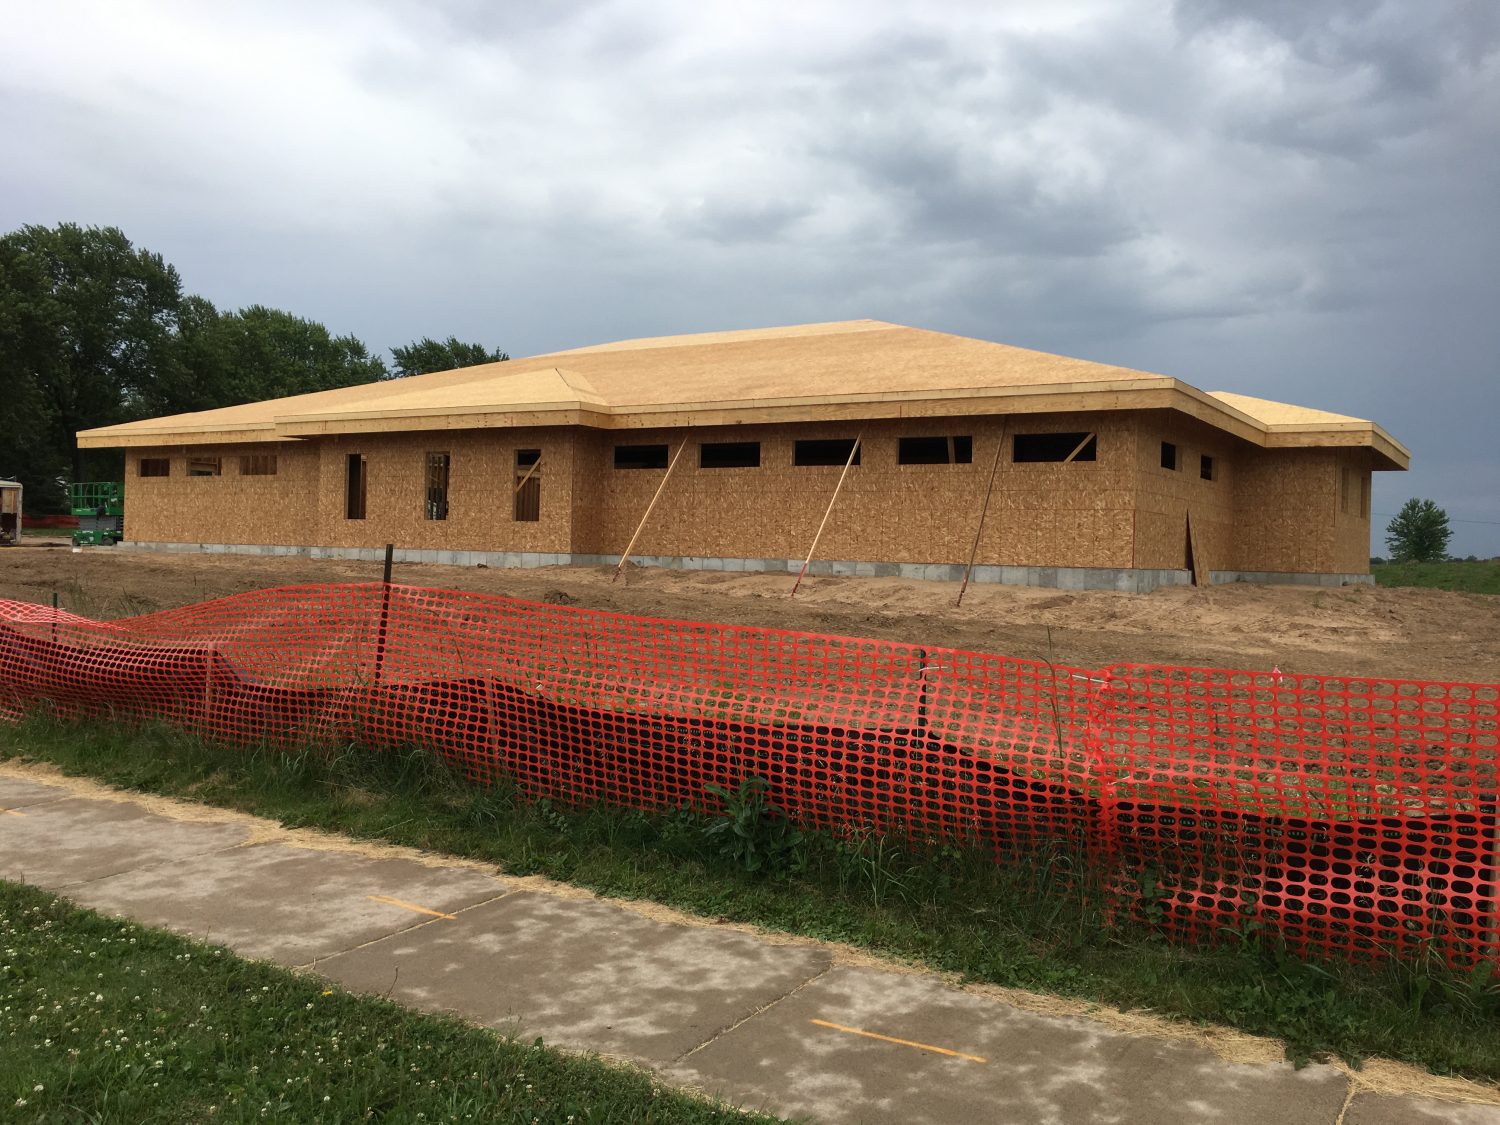 The Colby City Council recently approved $67,115 in additional work on the citys new library, which is currently under construction.